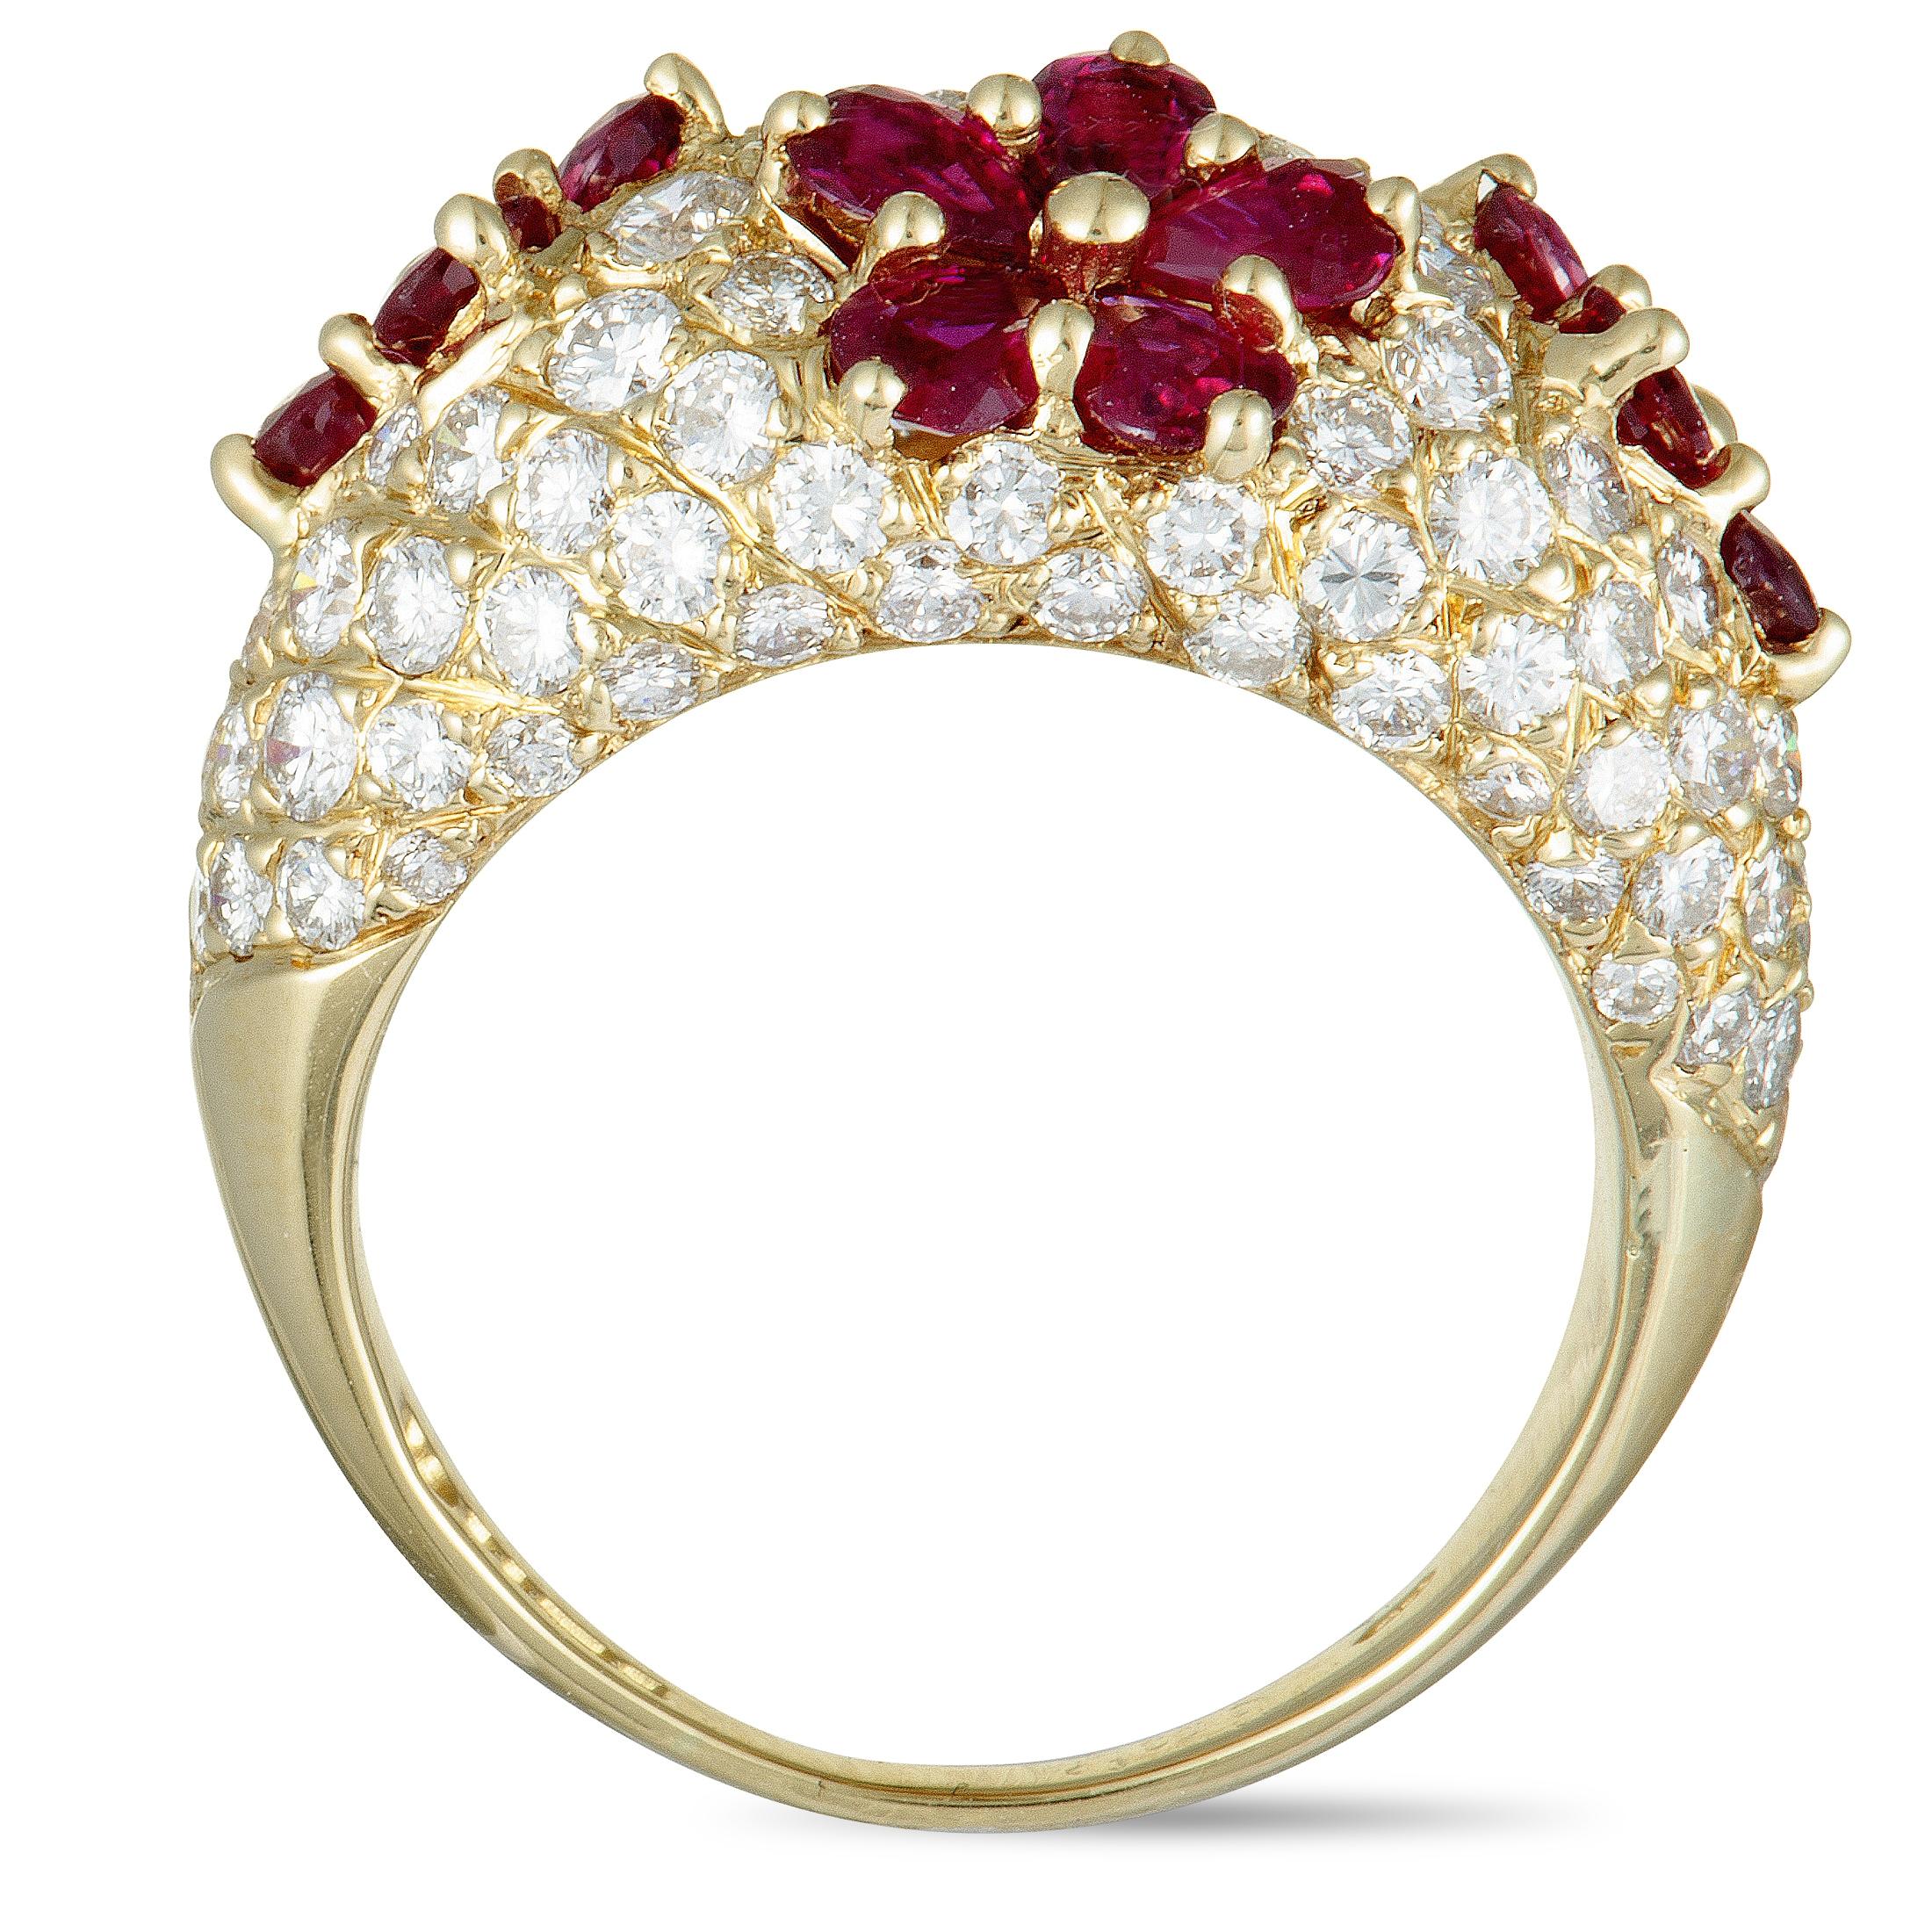 An epitome of prestige and extravagance, this fabulous jewelry piece that is presented by Graff boasts incredibly lavish décor, offering an exceptionally eye-catching appearance. The ring is wonderfully crafted from 18K yellow gold and embellished